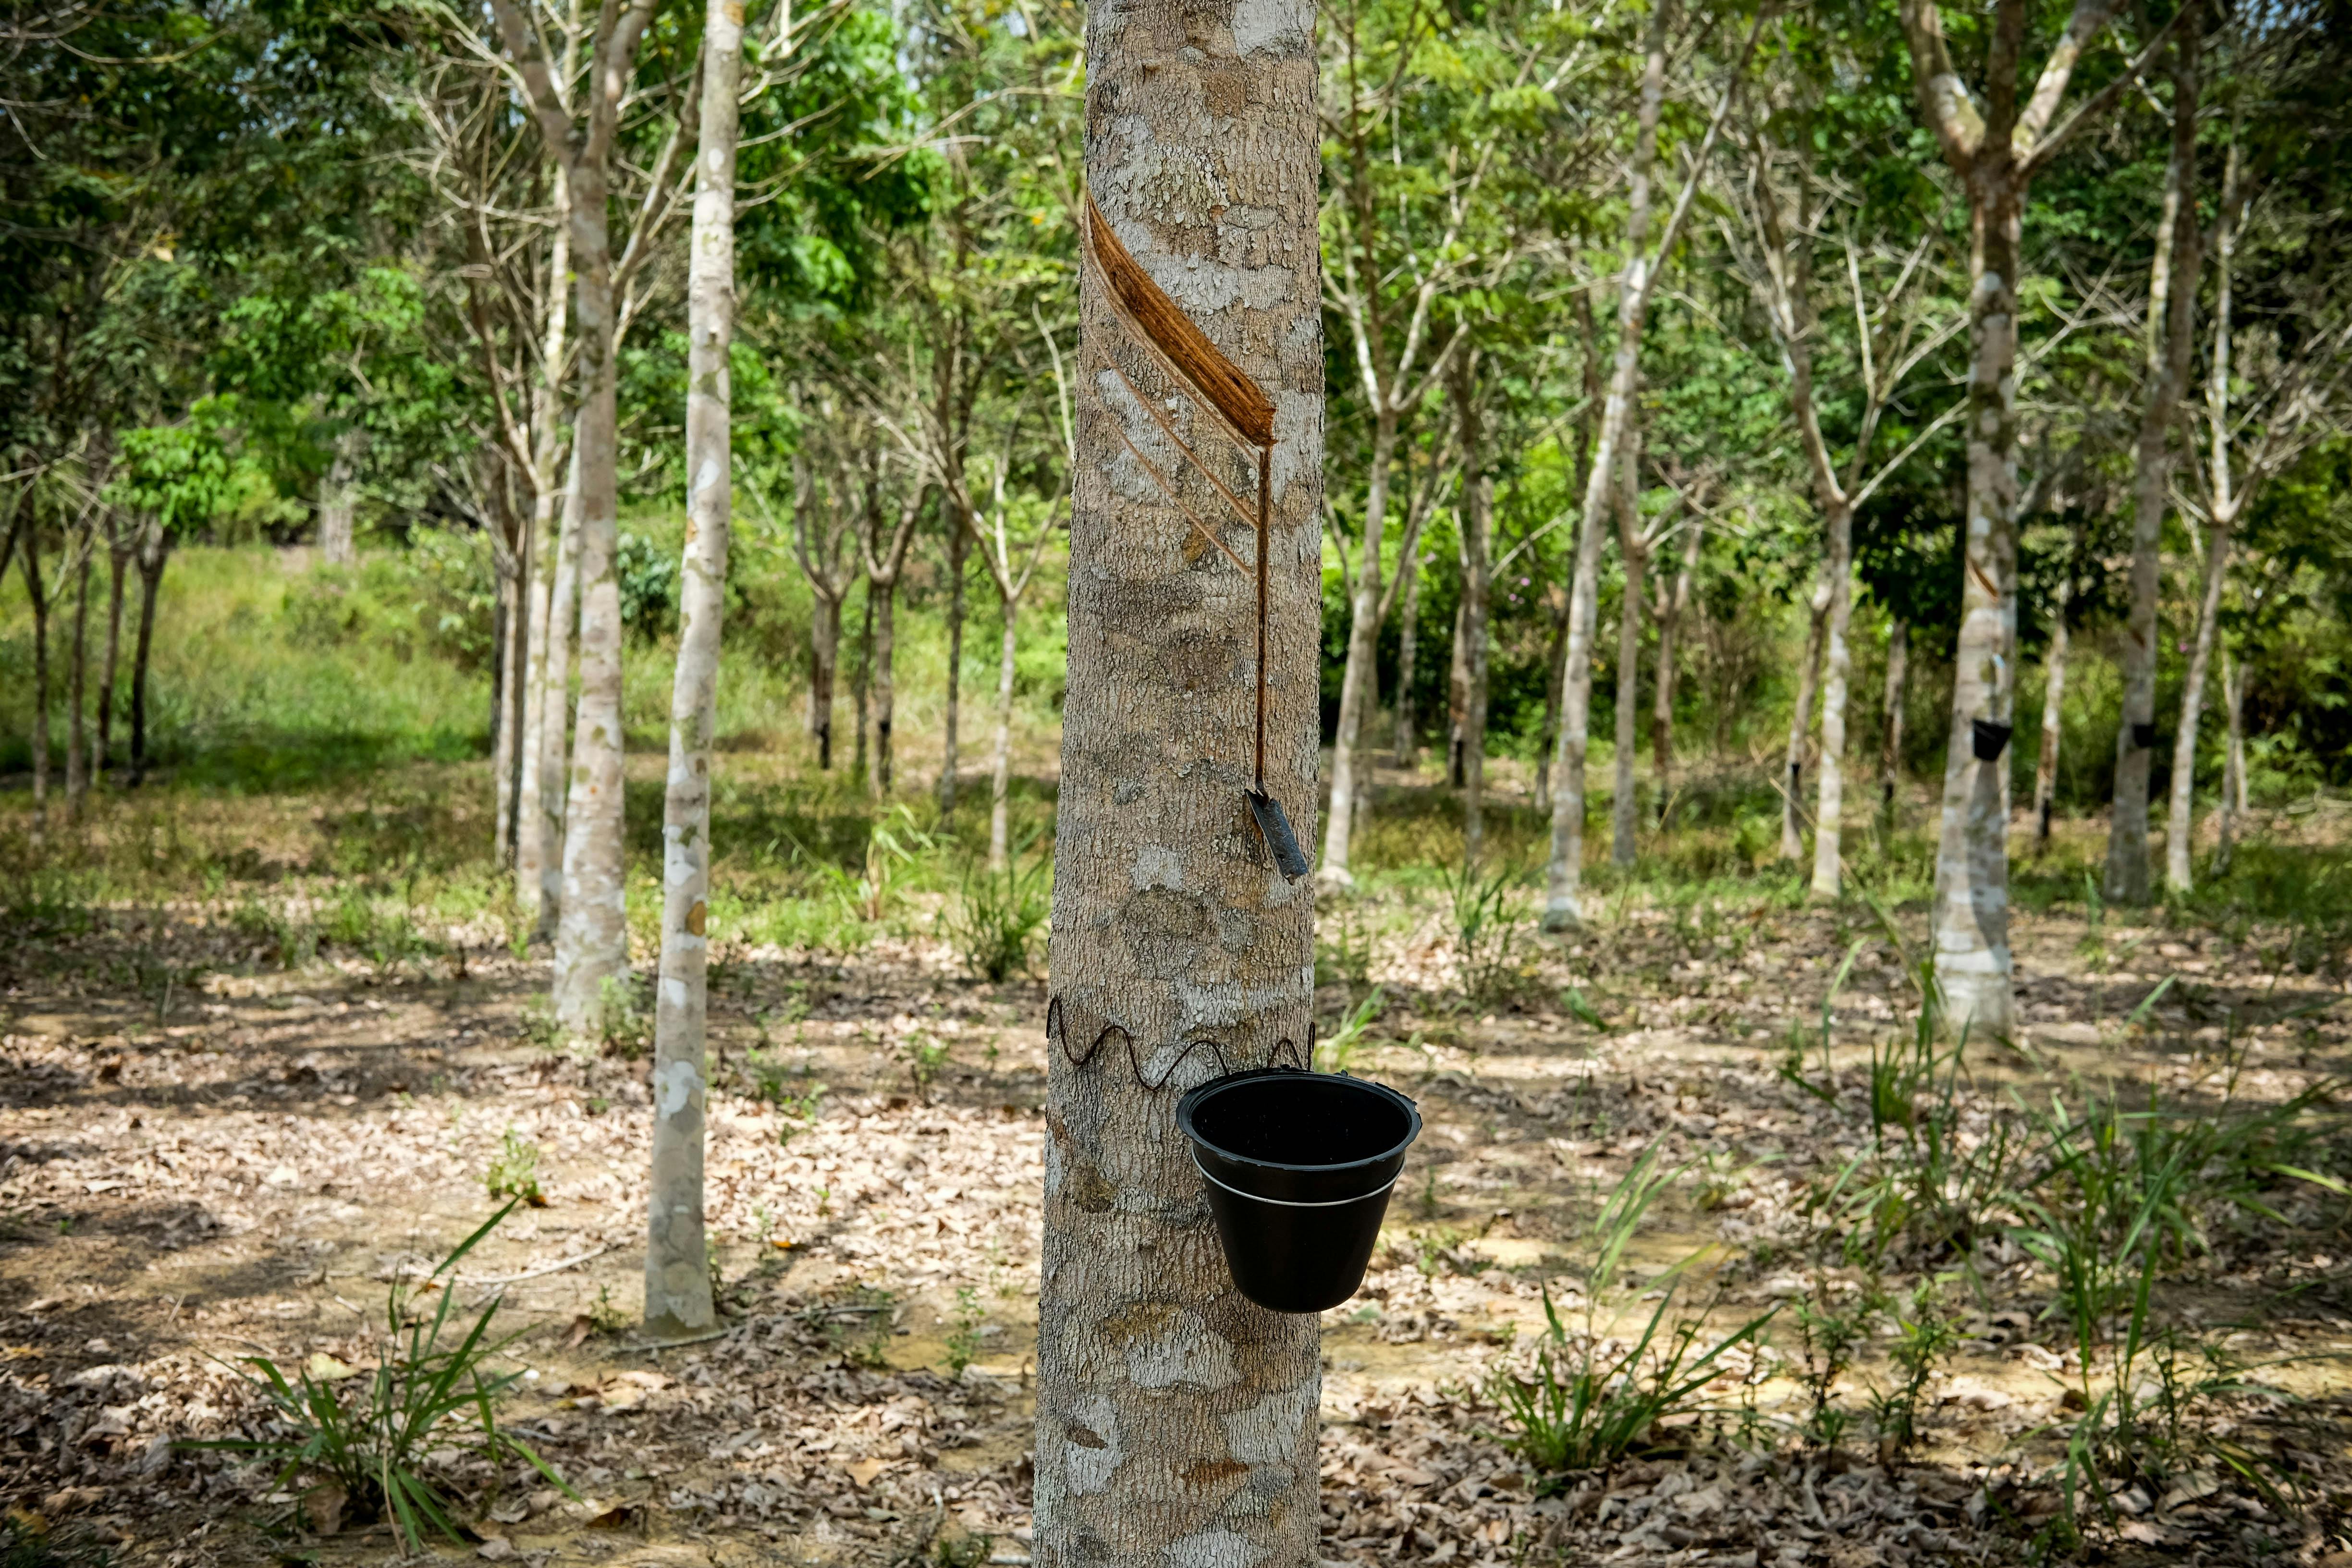 natural rubber buyers in europe